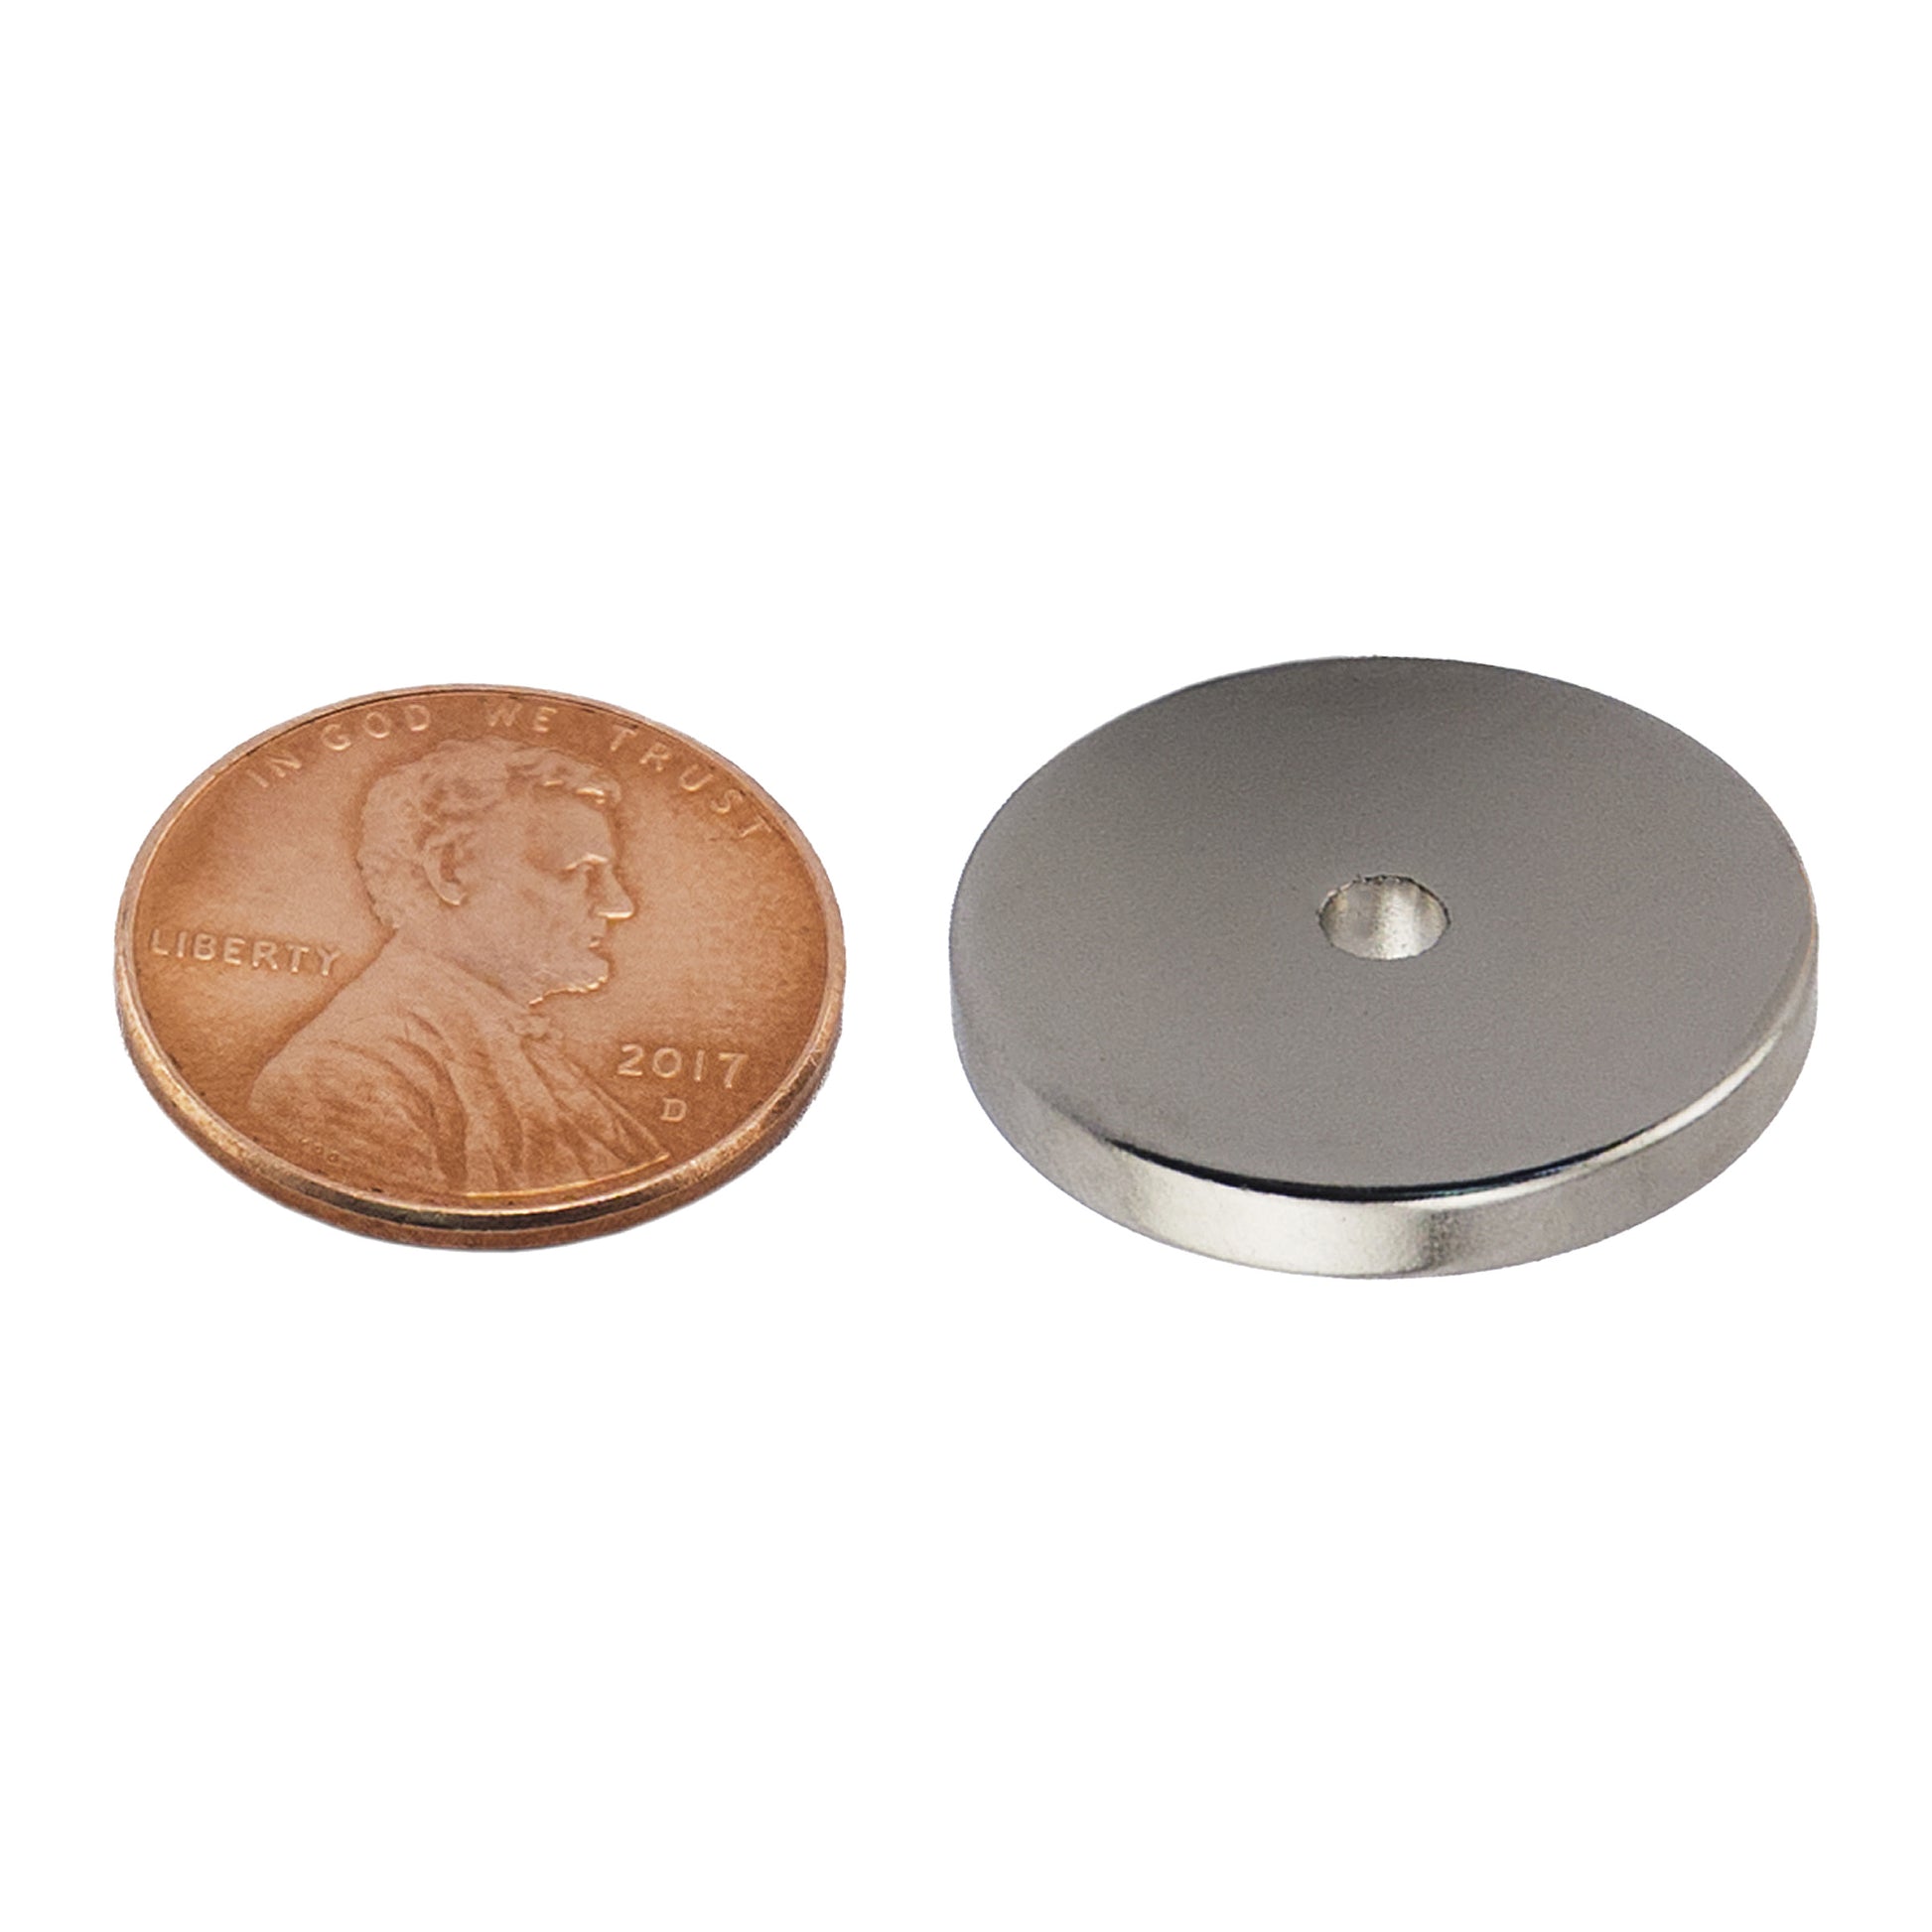 Load image into Gallery viewer, NR008705NS01 Neodymium Ring Magnet - Compared to Penny for Size Reference